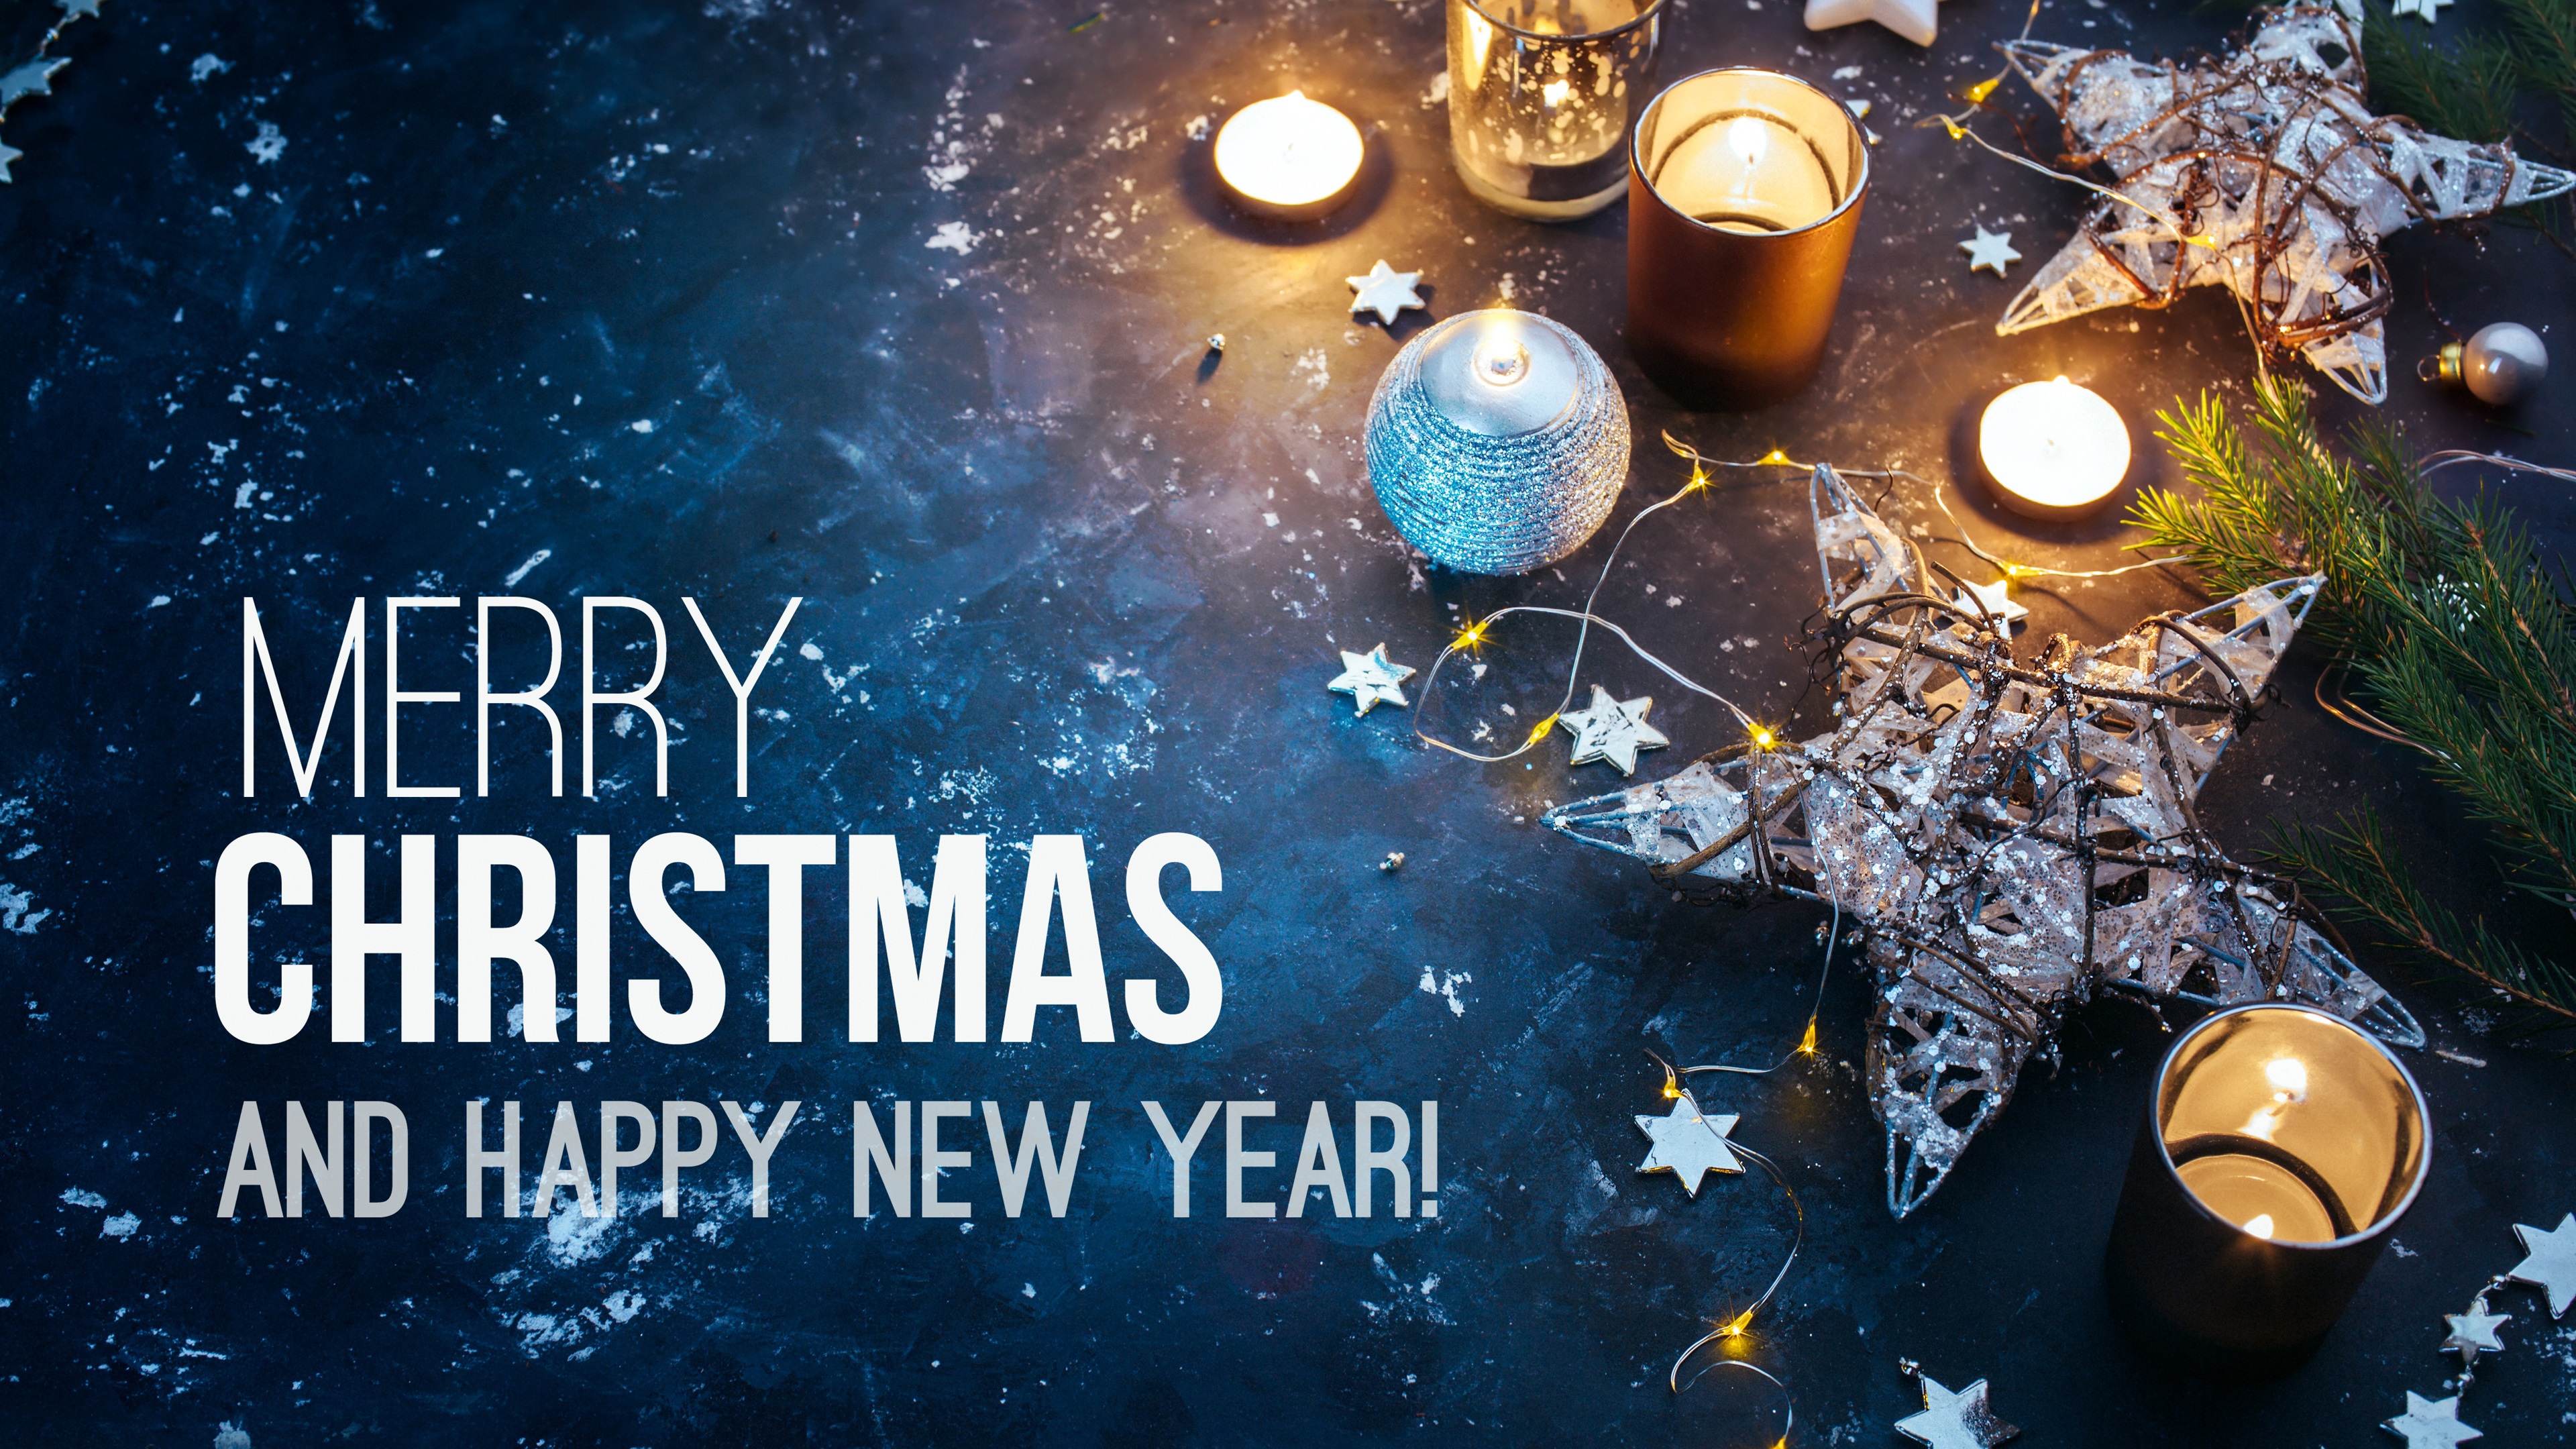 Wallpaper Merry Christmas And Happy New Year, Candles, - Merry Christmas Happy New Year - HD Wallpaper 